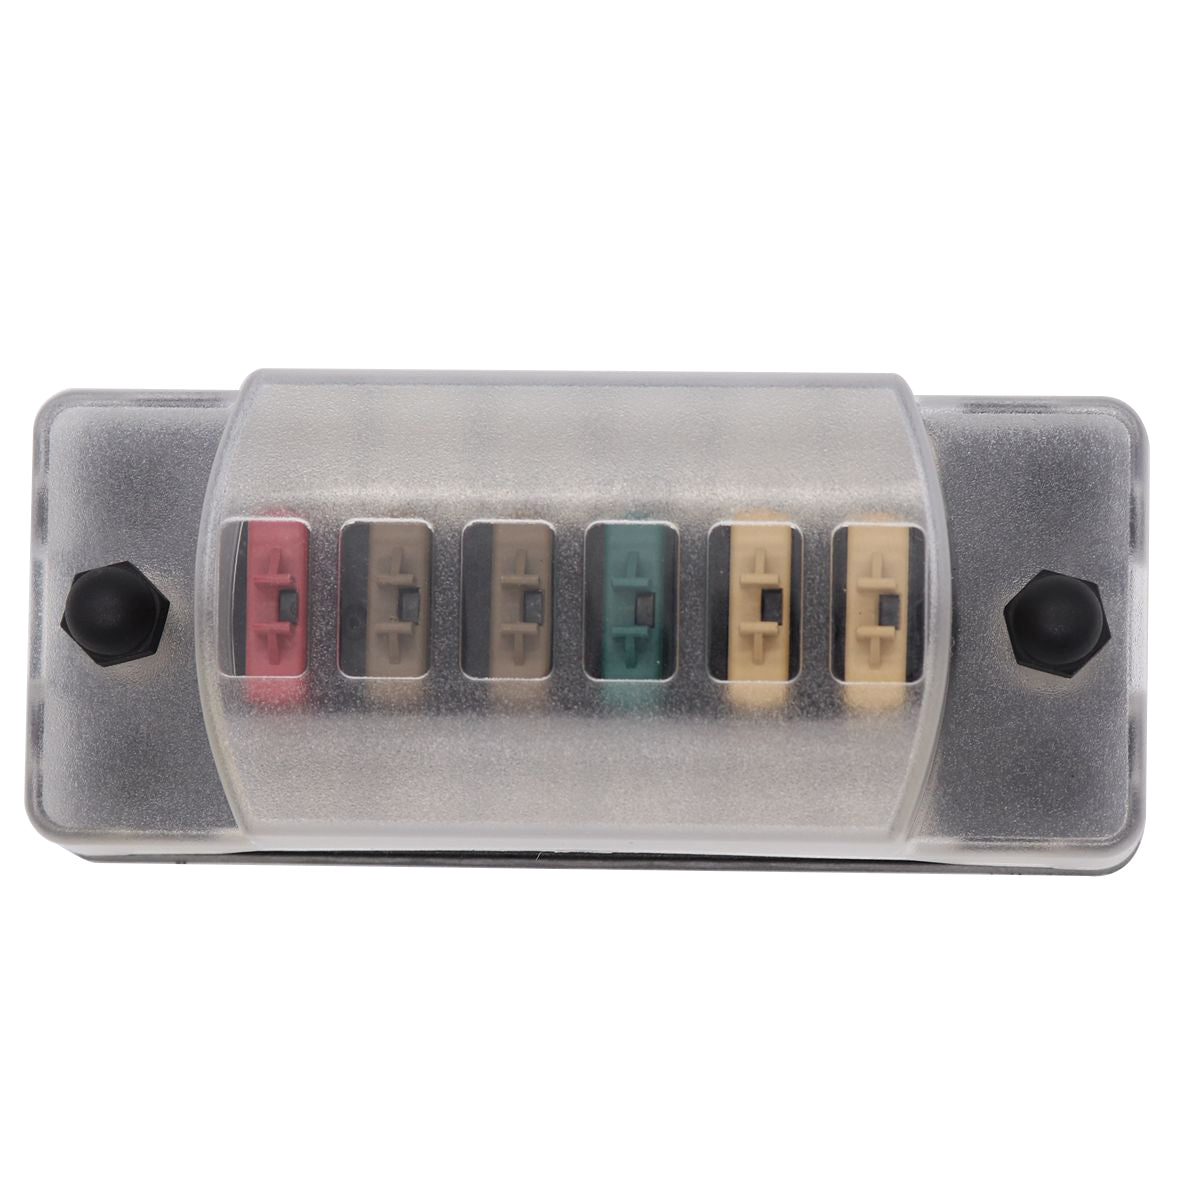 Dim Gray 75A Circuit Fuse Block With Negative Bus 6 Way Fuse Box Ground Negative for Bus Car Boat Marine Auto